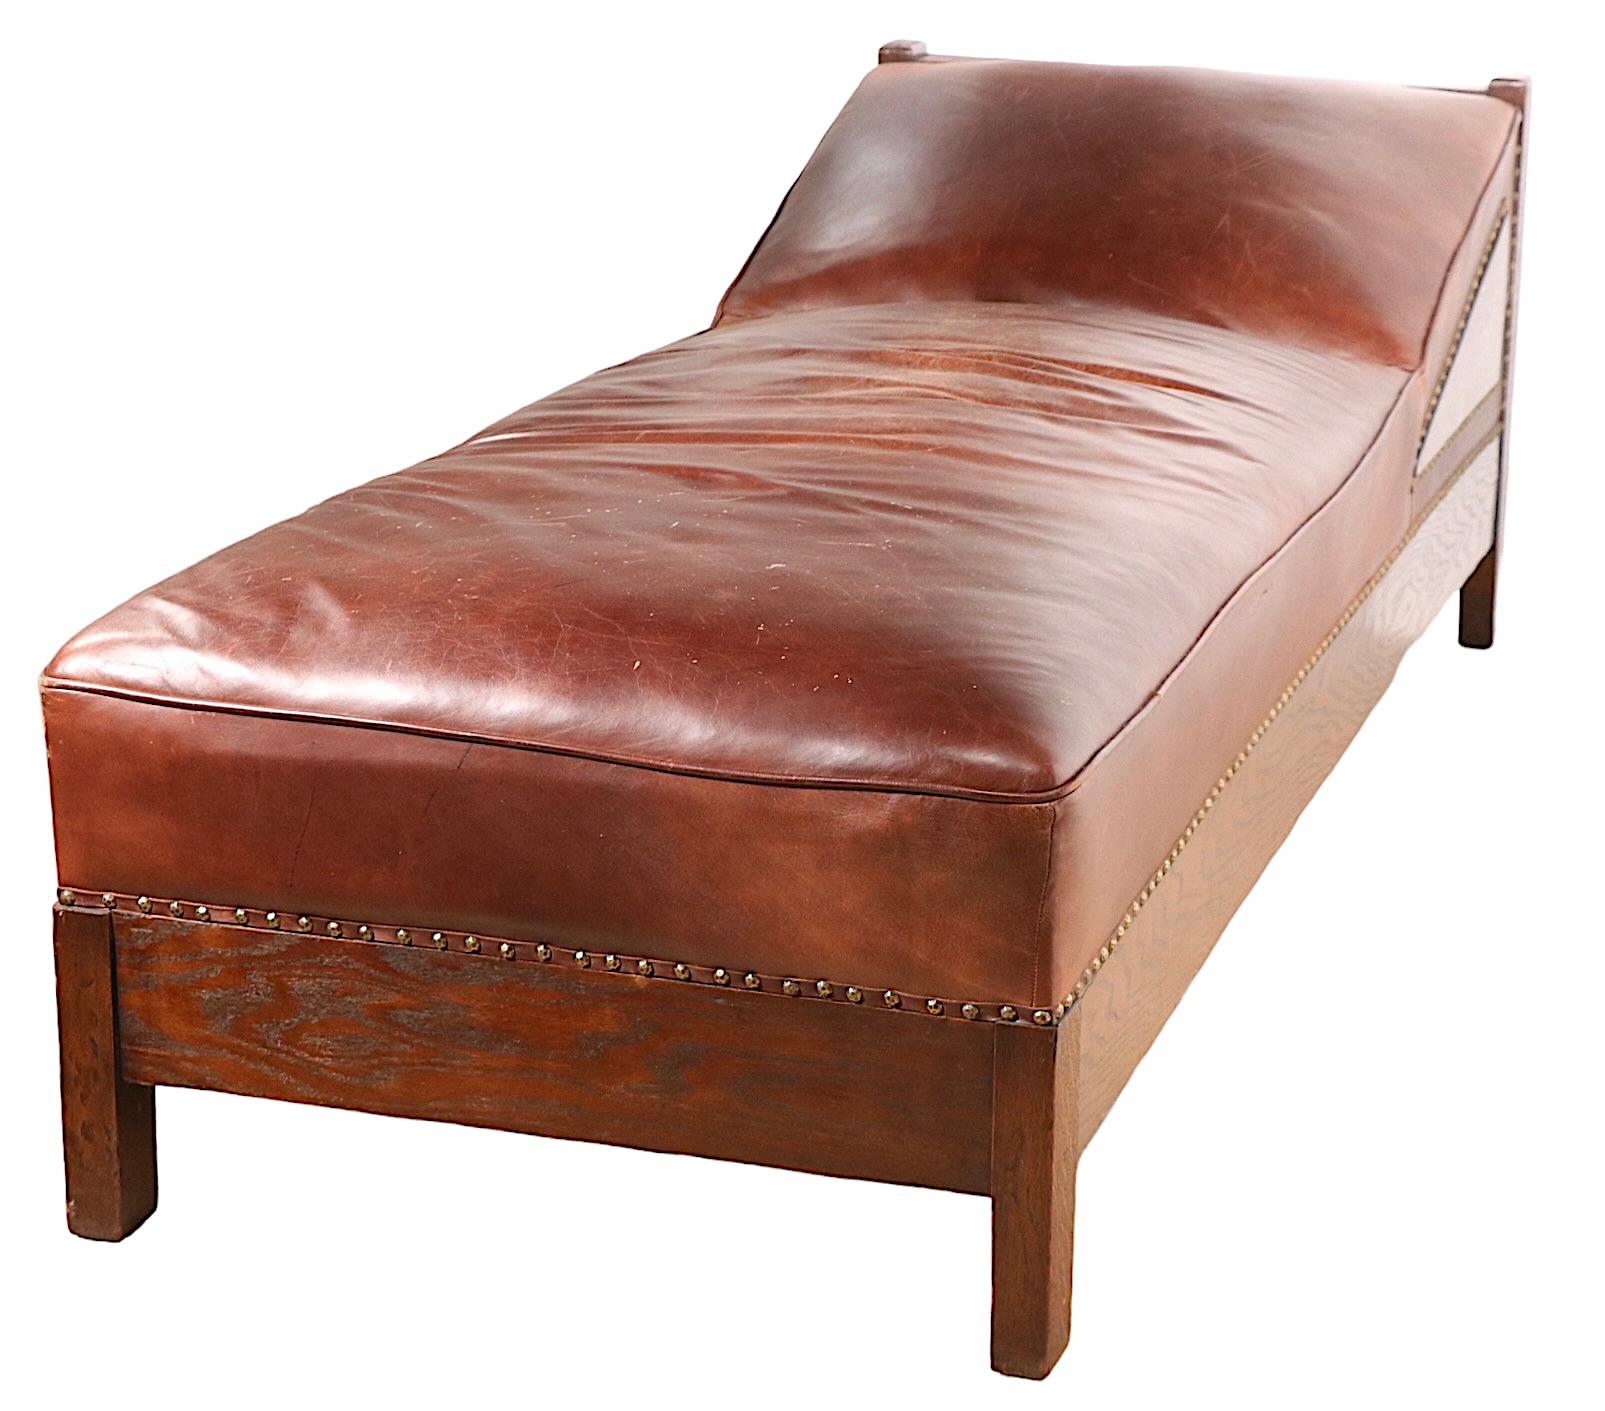 Oak and Leather Arts and Crafts Mission Daybed Chaise Lounge c. 1900 -1920's 2